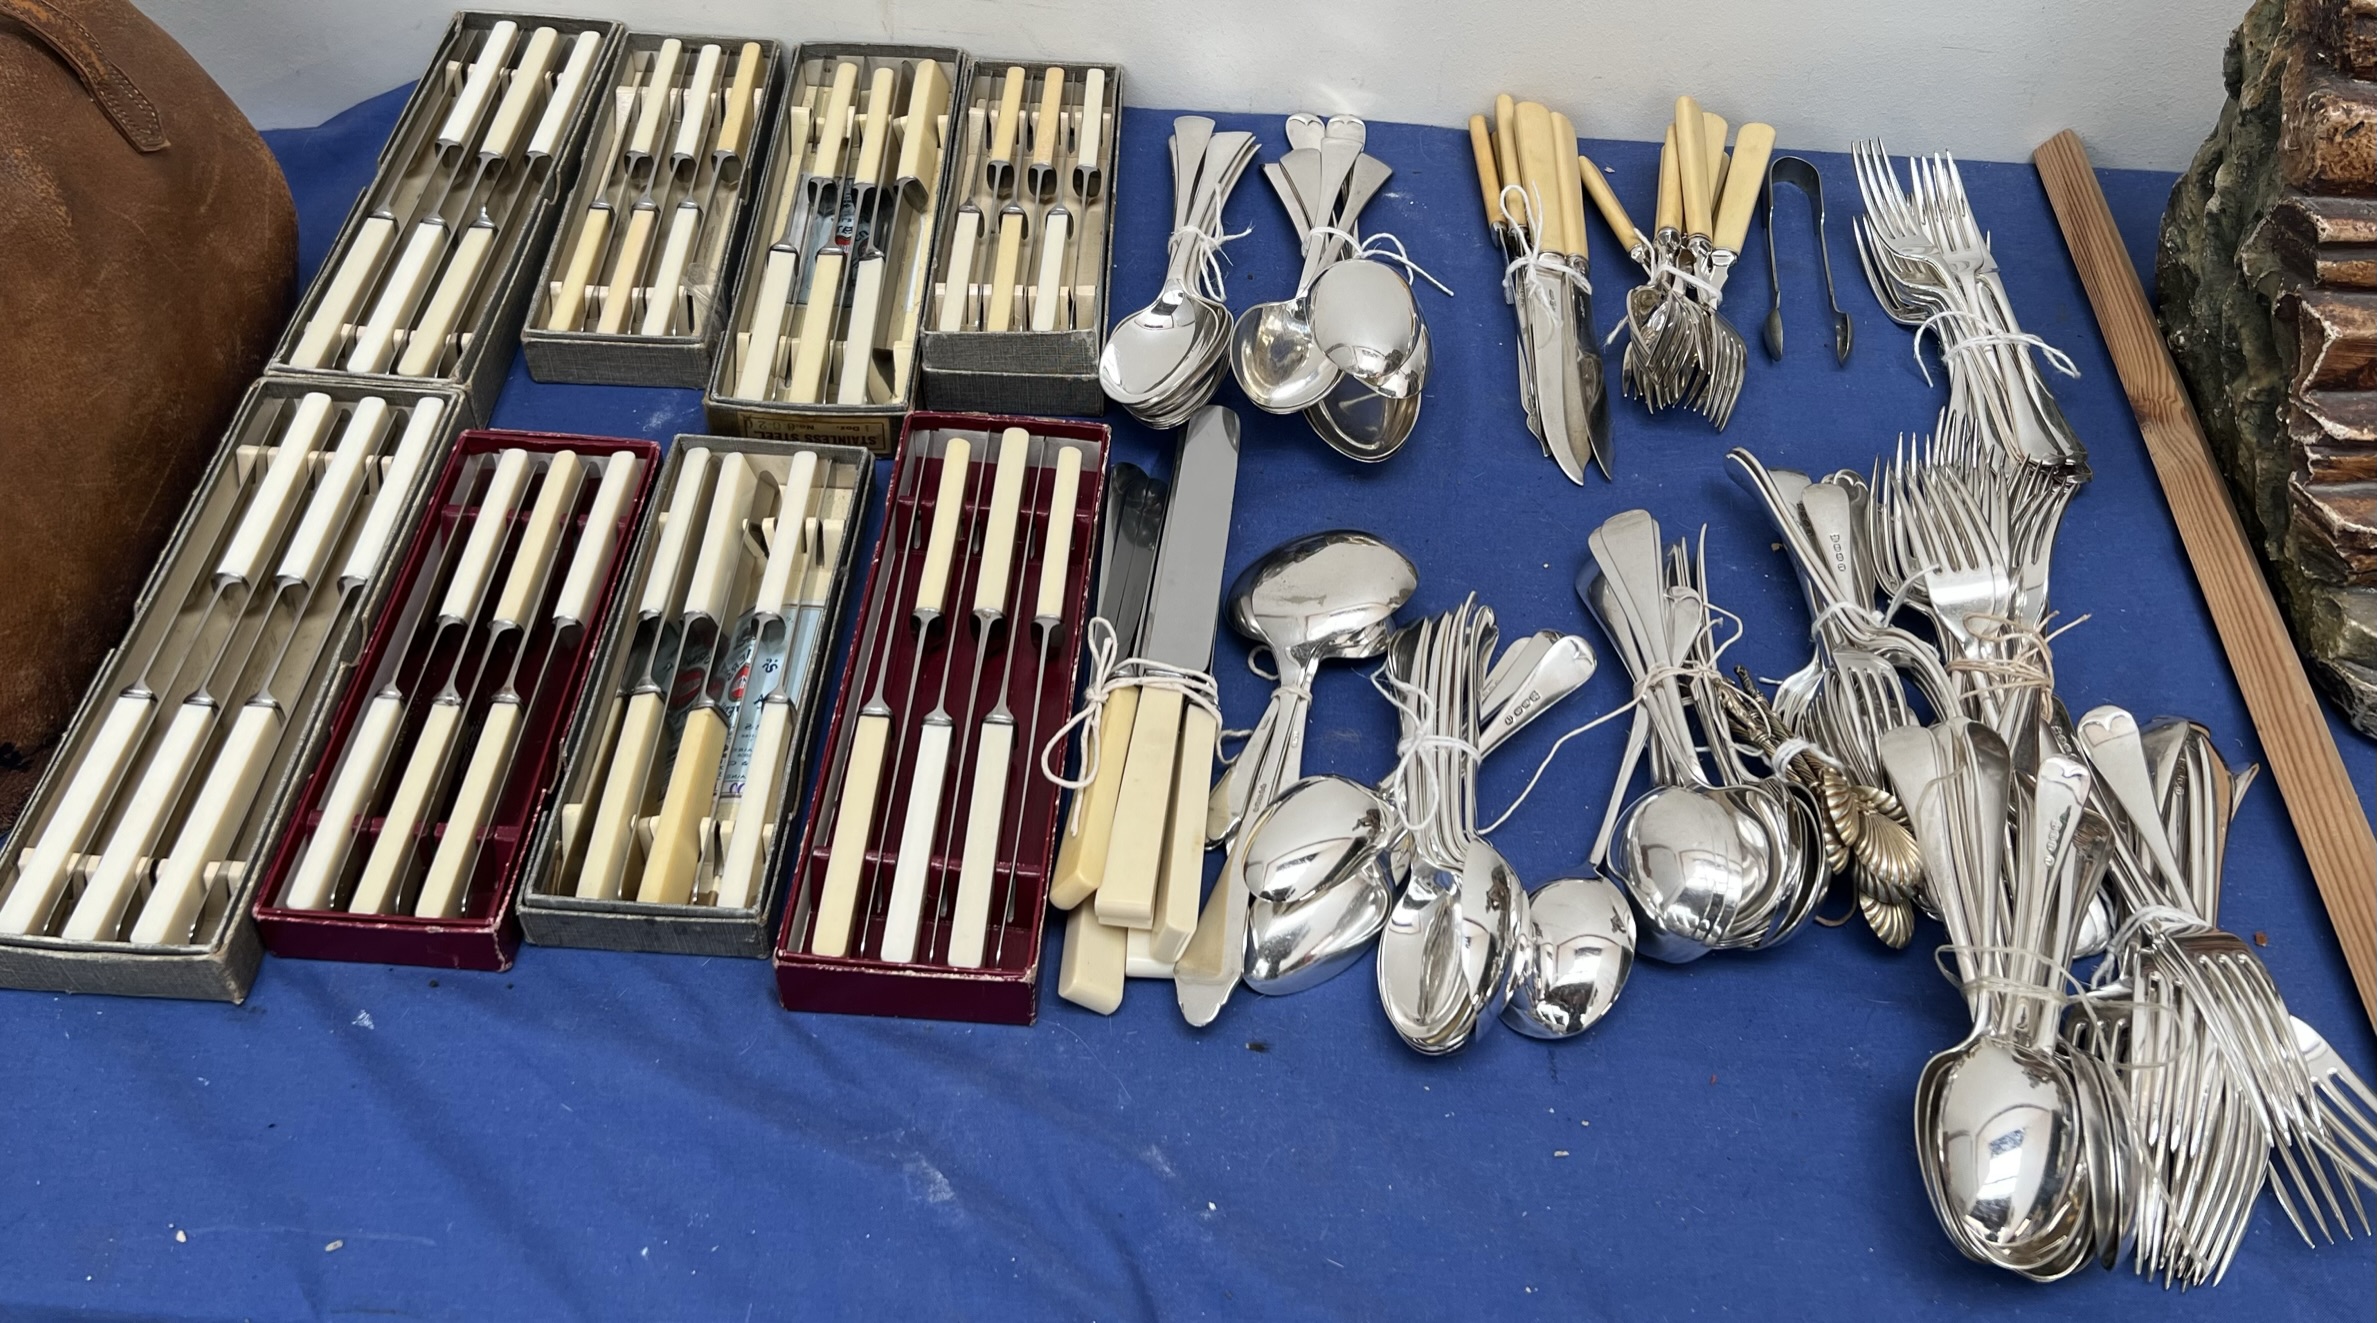 Cased knives together with assorted electroplated flatwares